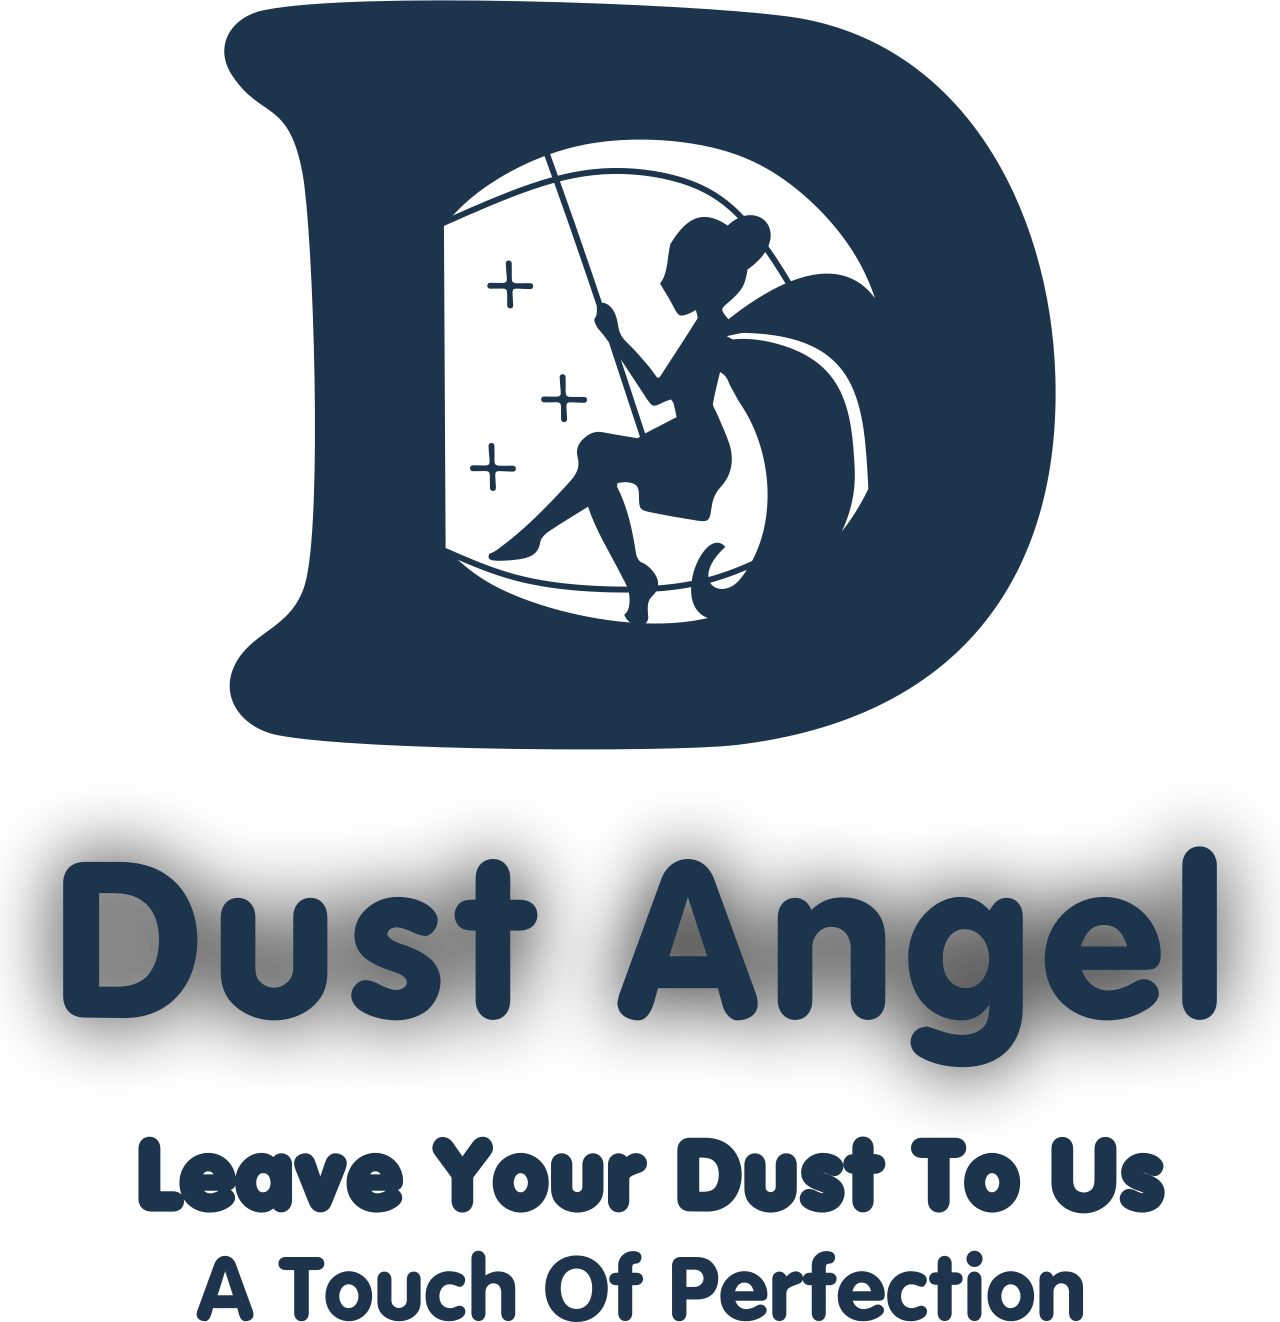 Dust Angel's web page